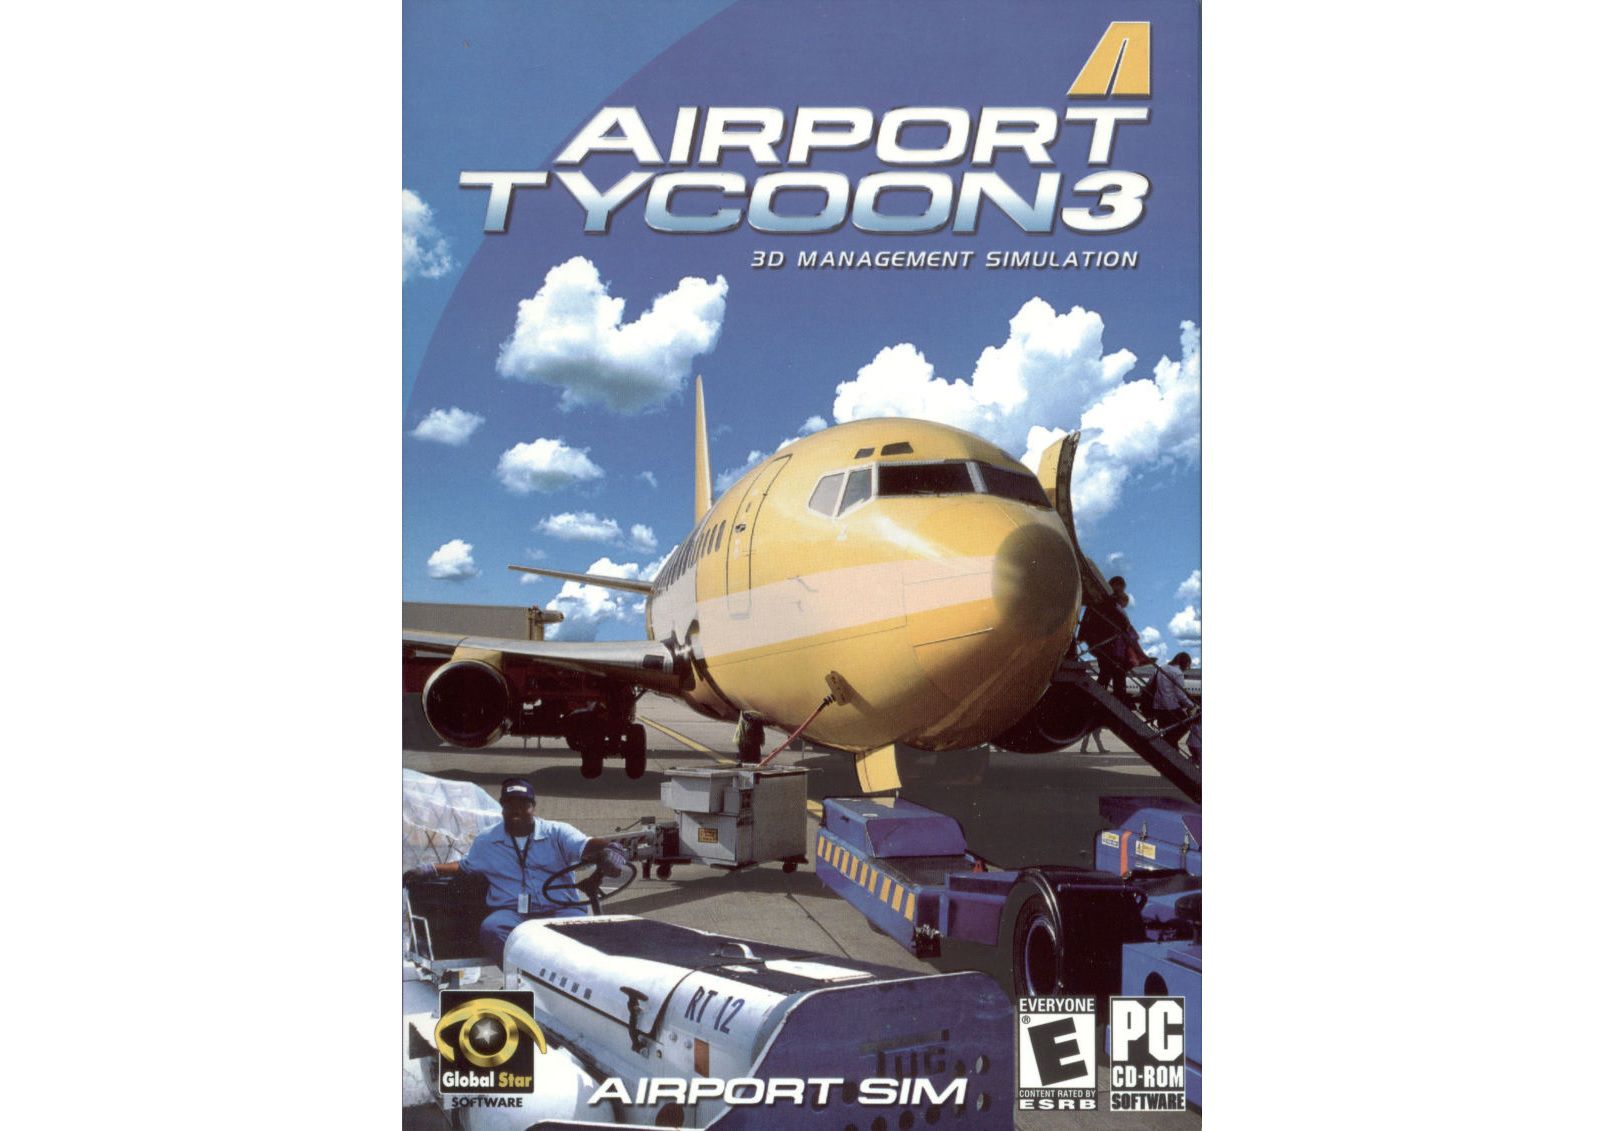 Luchthaven Tycoon 3